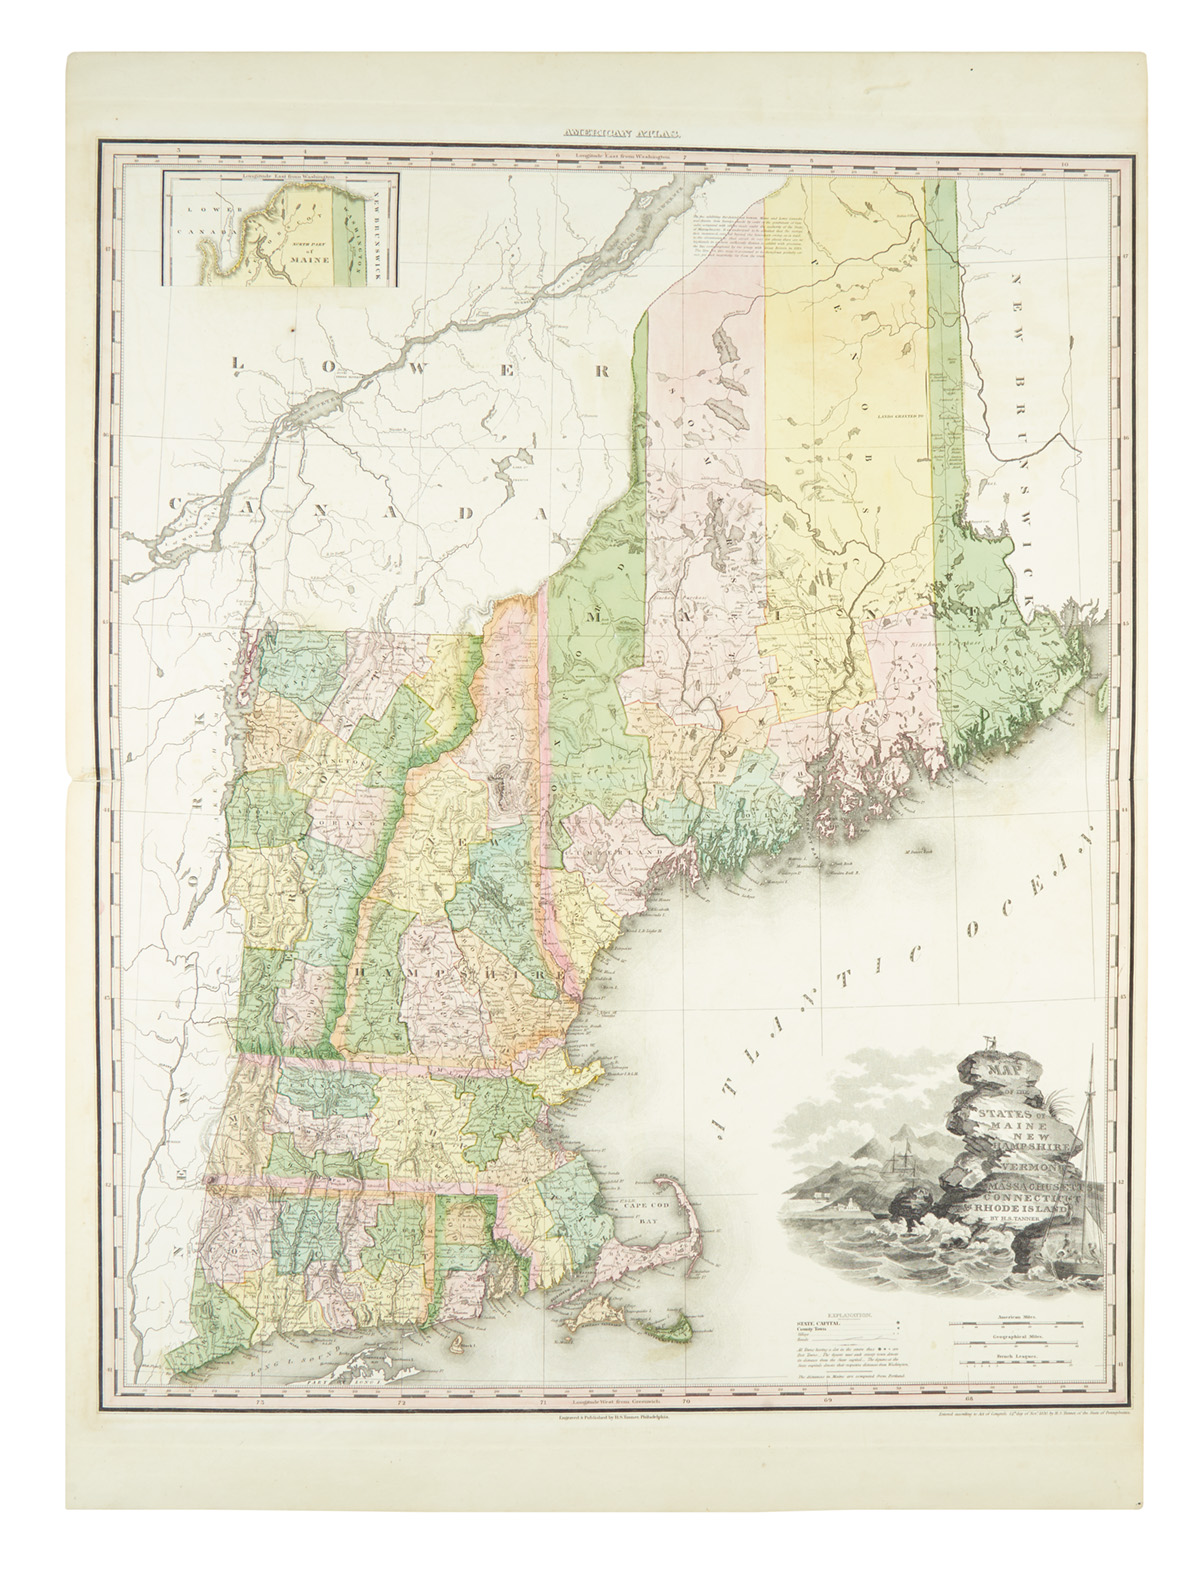 TANNER, HENRY SCHENK. Map of the States of Maine, New Hampshire, Vermont, Massachusetts, Connecticut & Rhode Island.